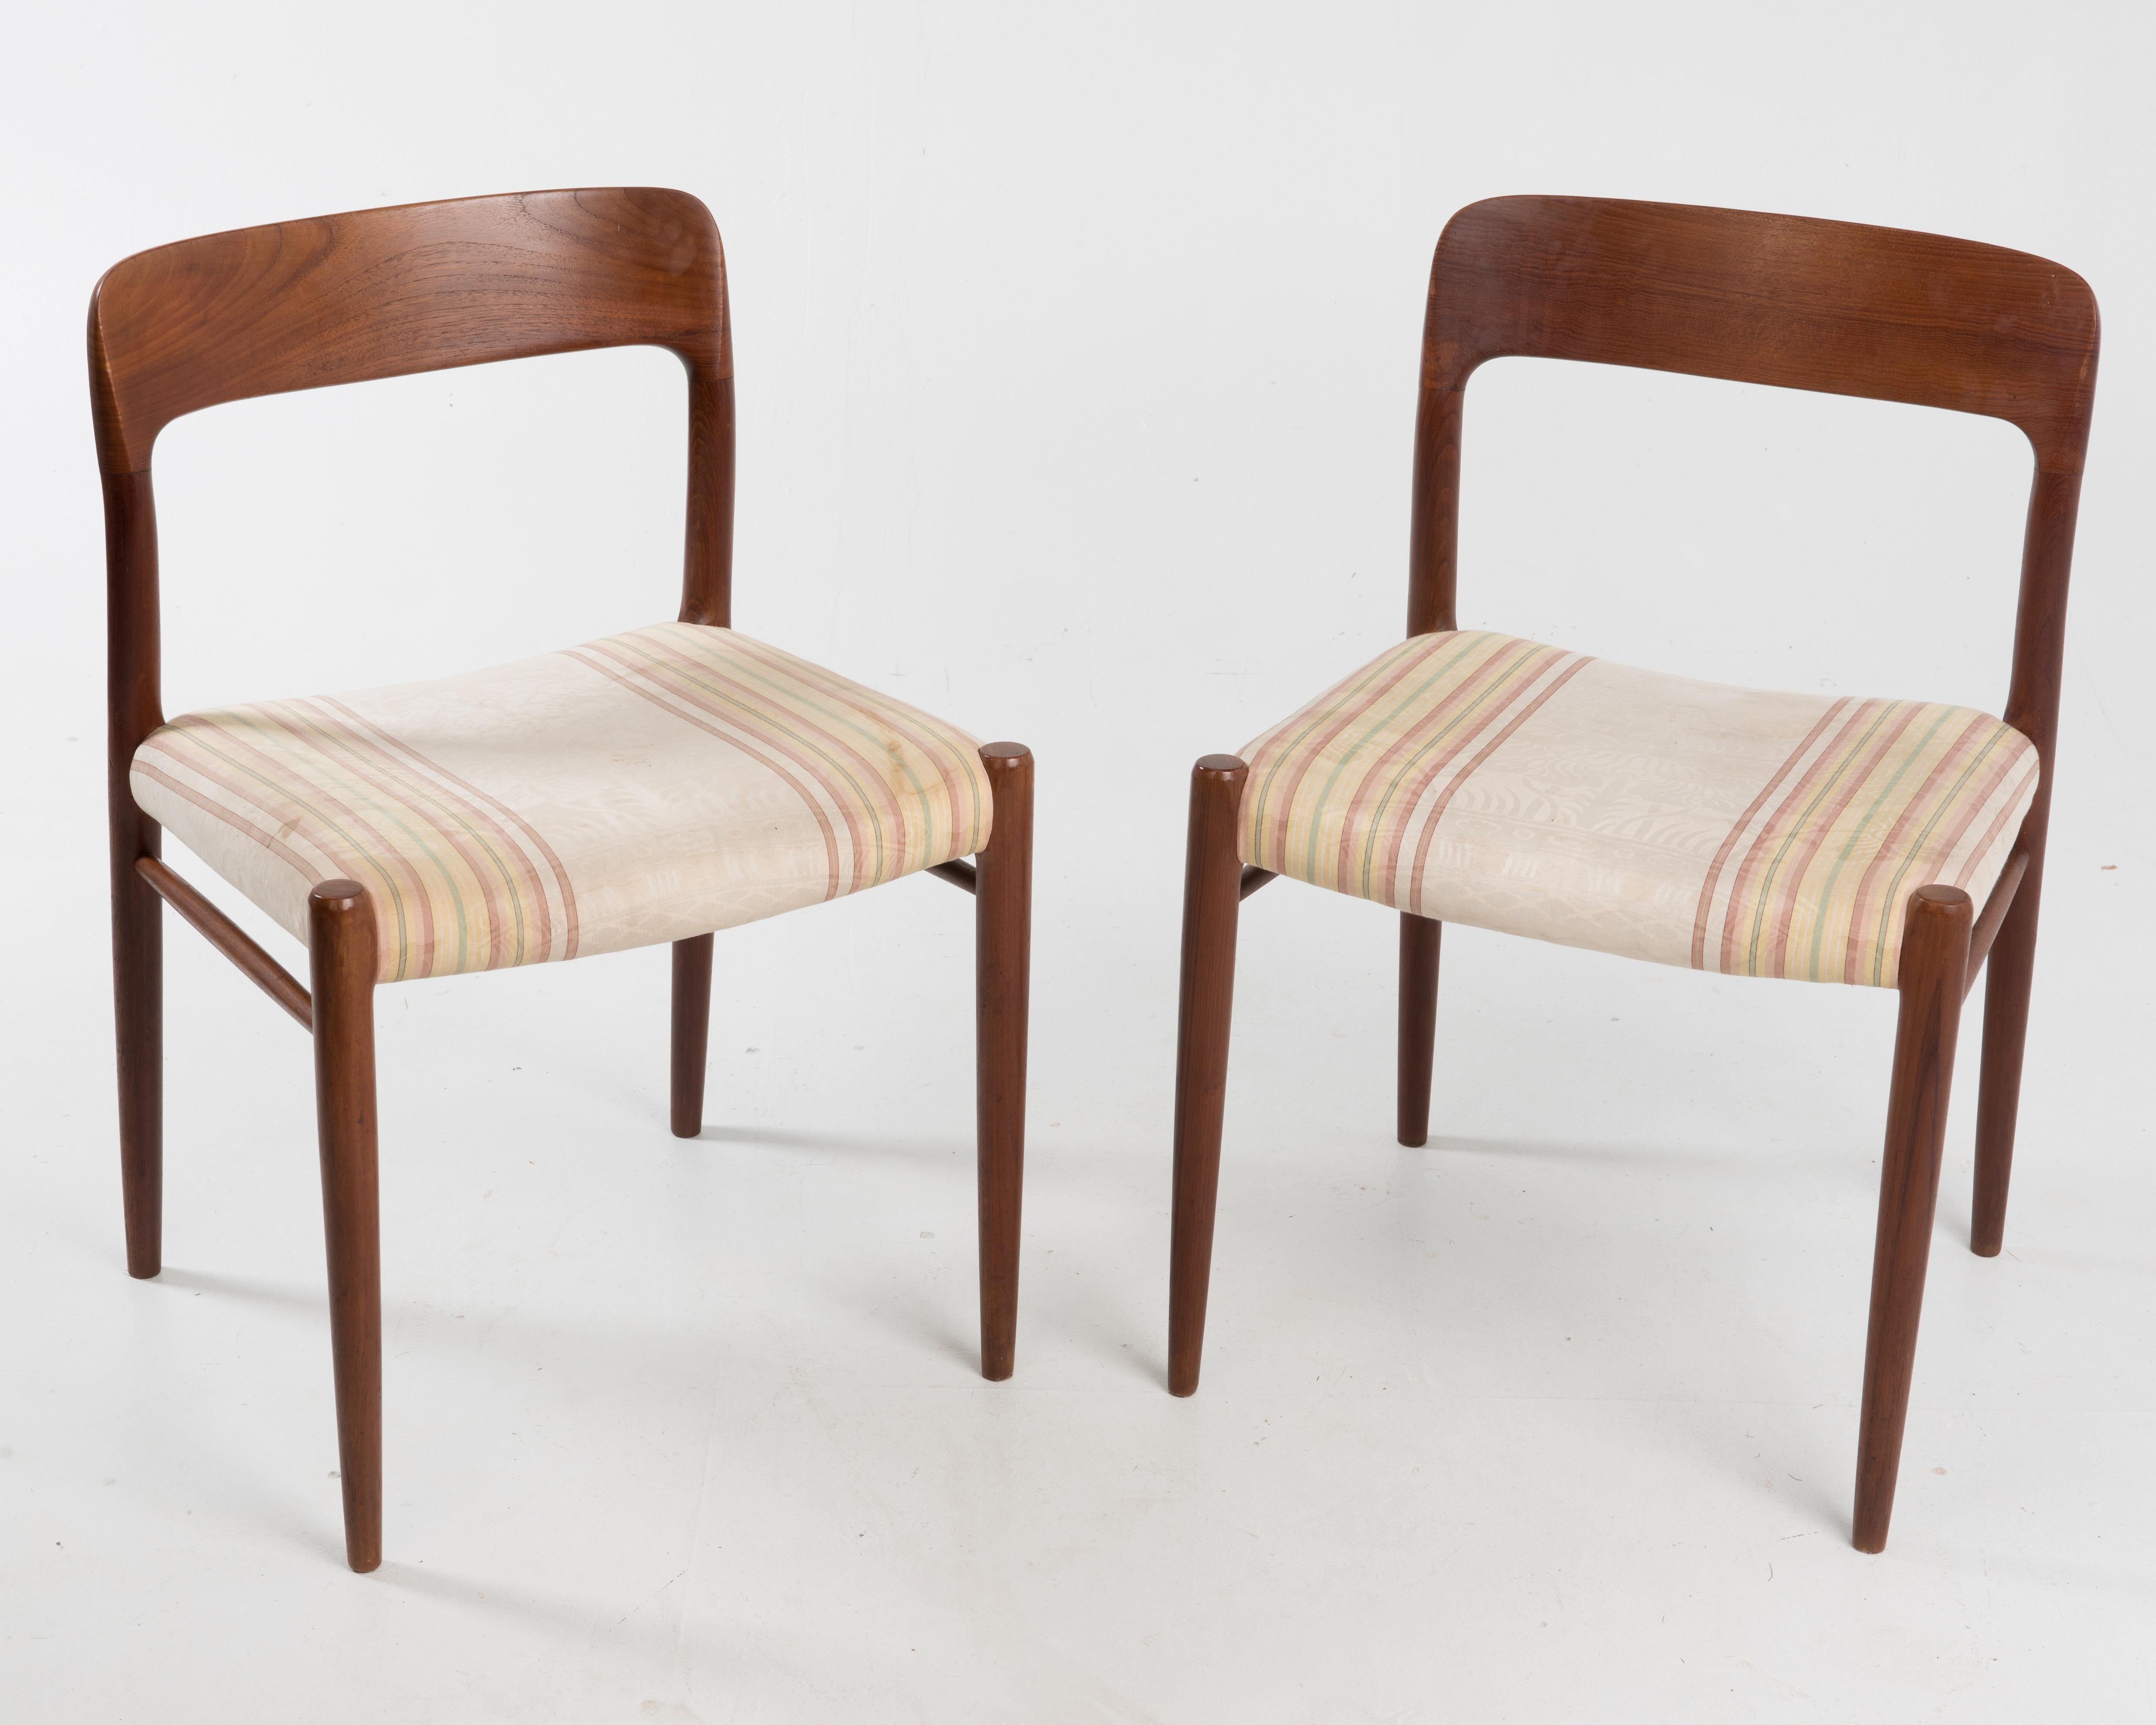 Pair of Niels Moller model 75 dining or side chairs, 1960s. Solid teak frames with fabric seats. The seats appear original, at the very least the fabric has been in place a very long time. The chairs are unmarked, we think the mark is hidden by the